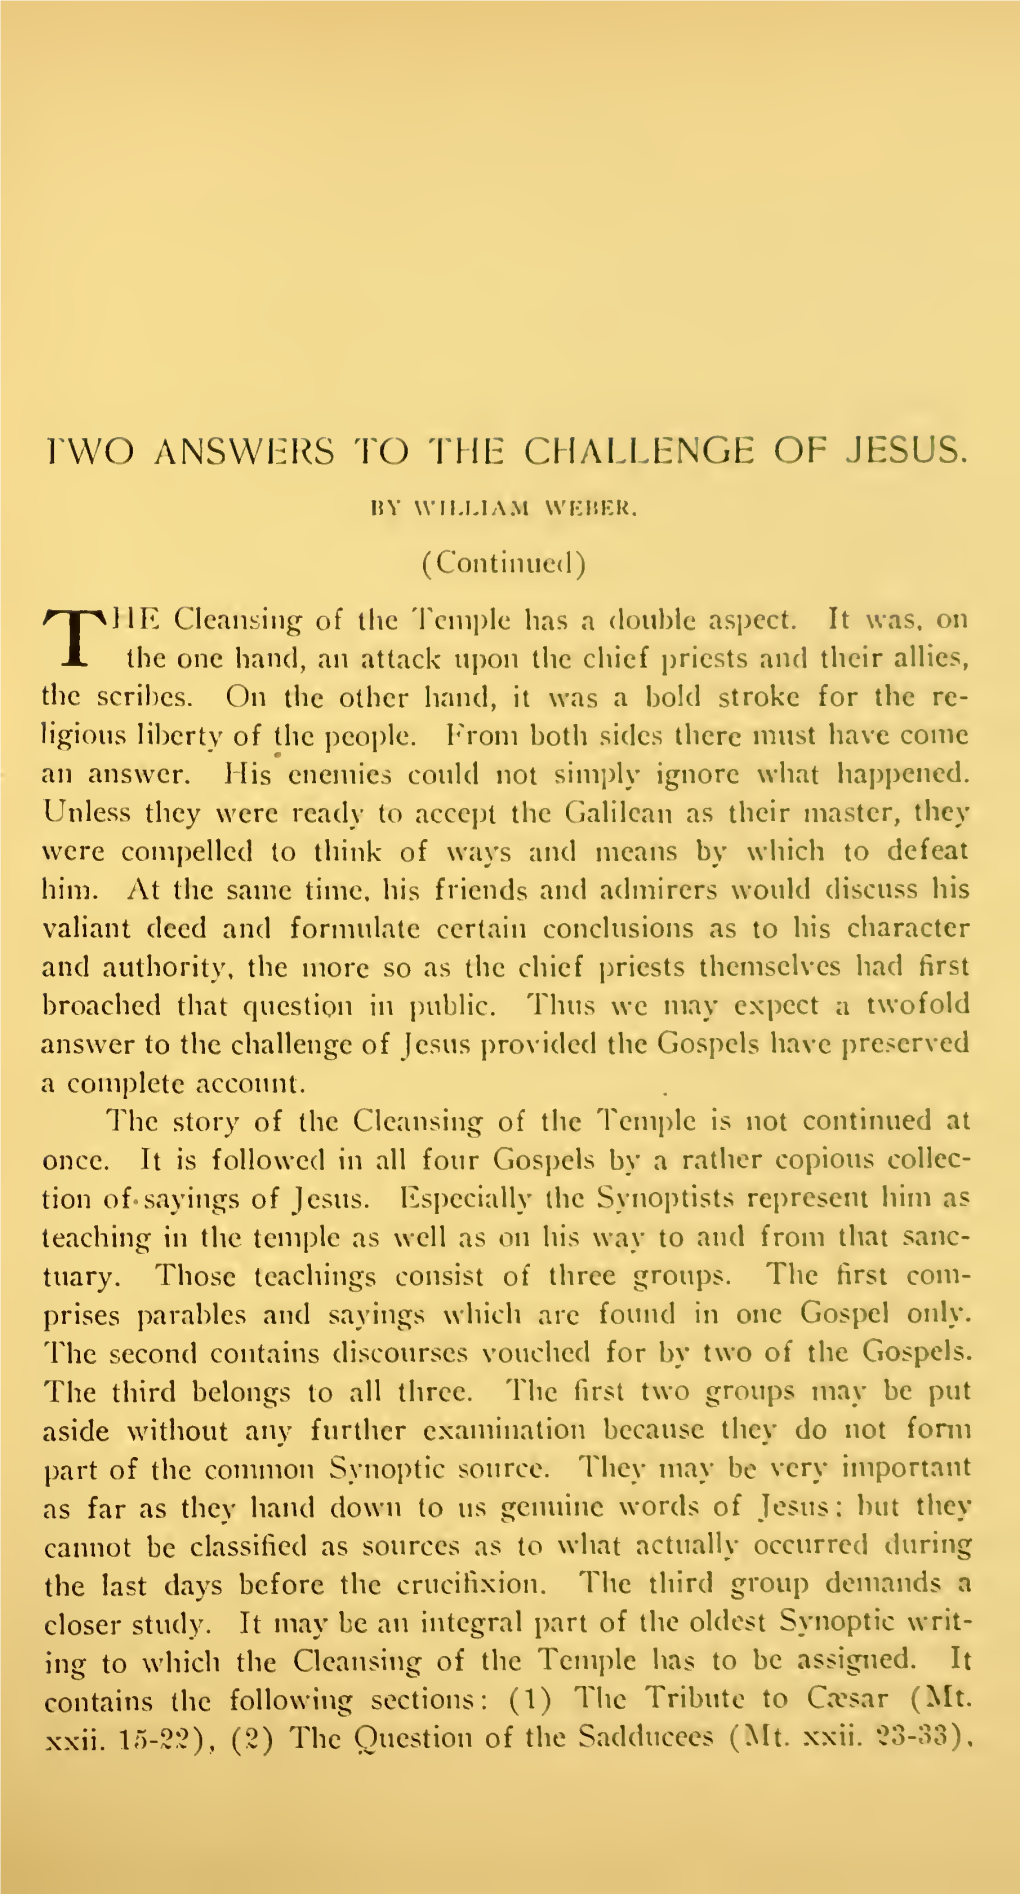 Two Answers to the Challenge of Jesus